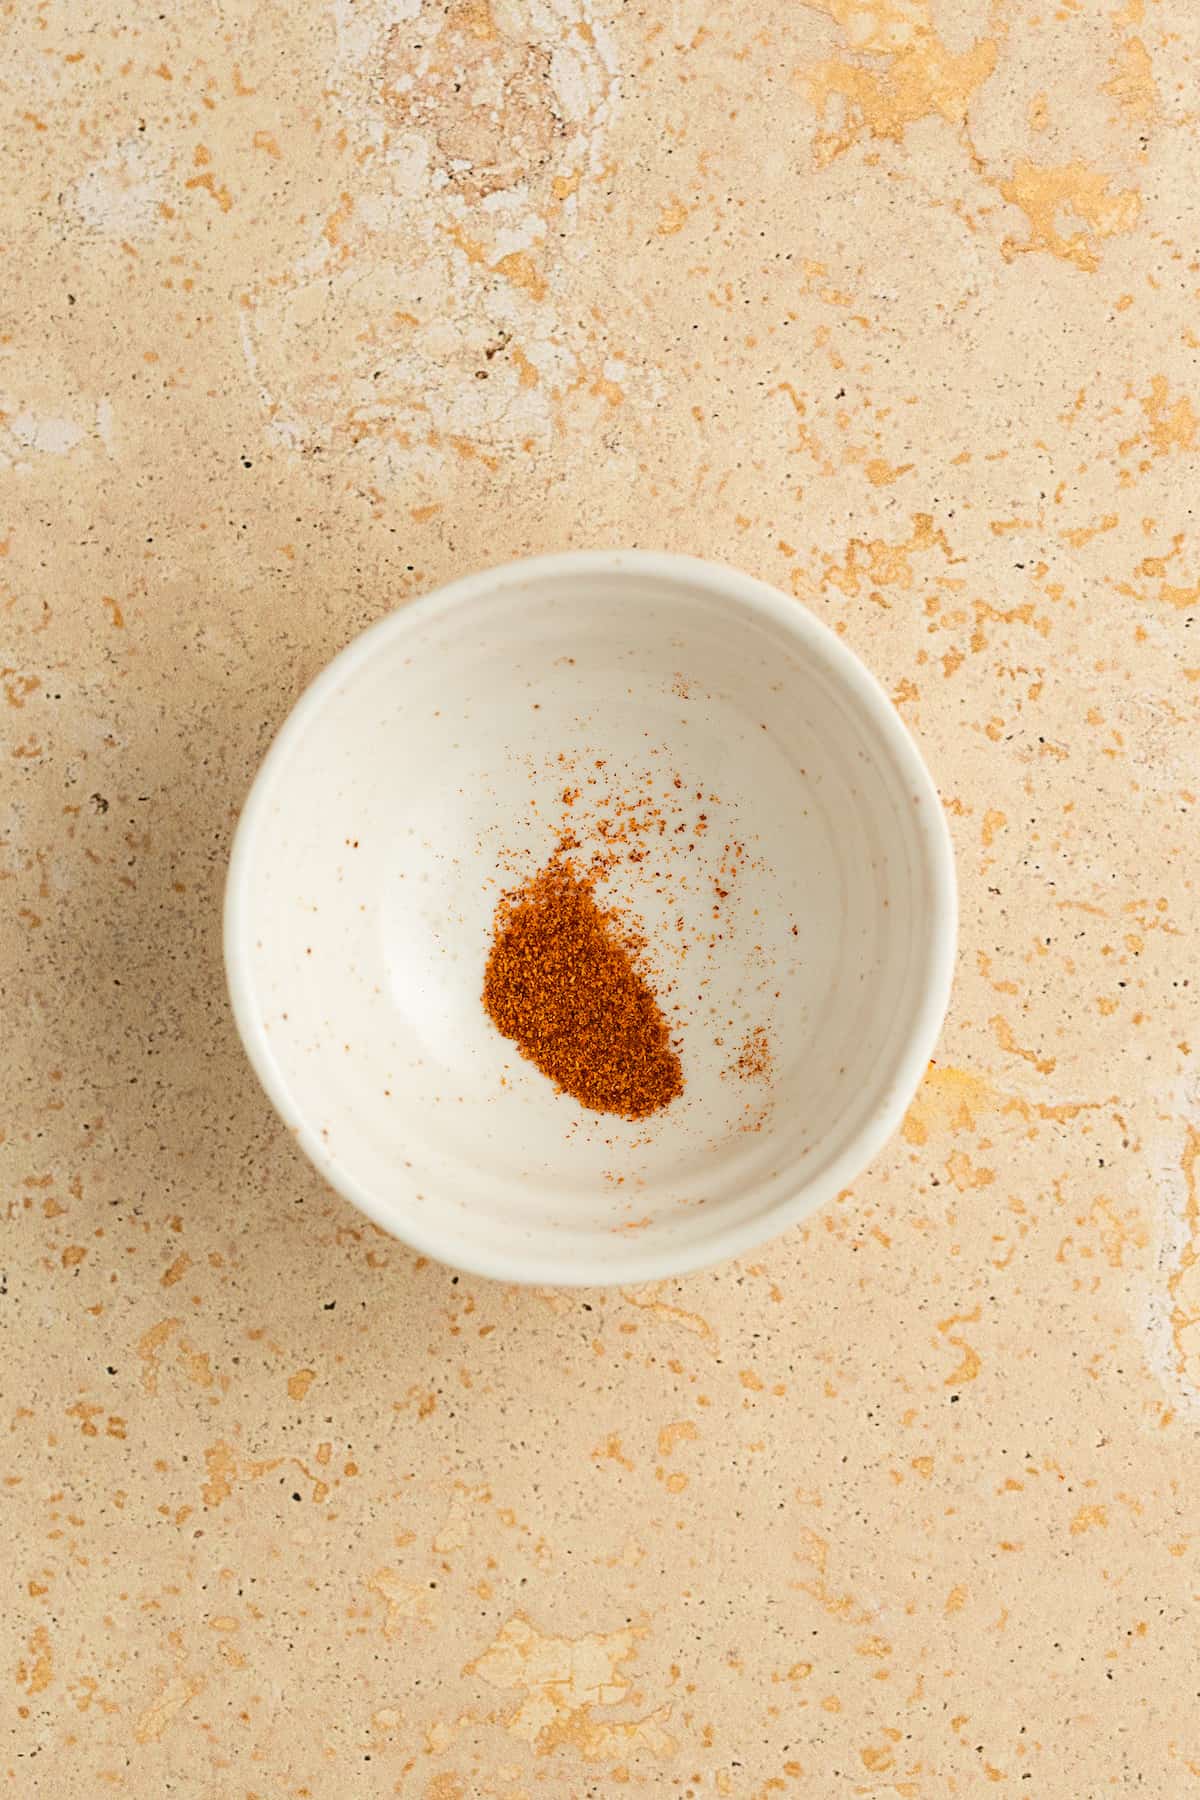 Placing the saffron threads in a small container.